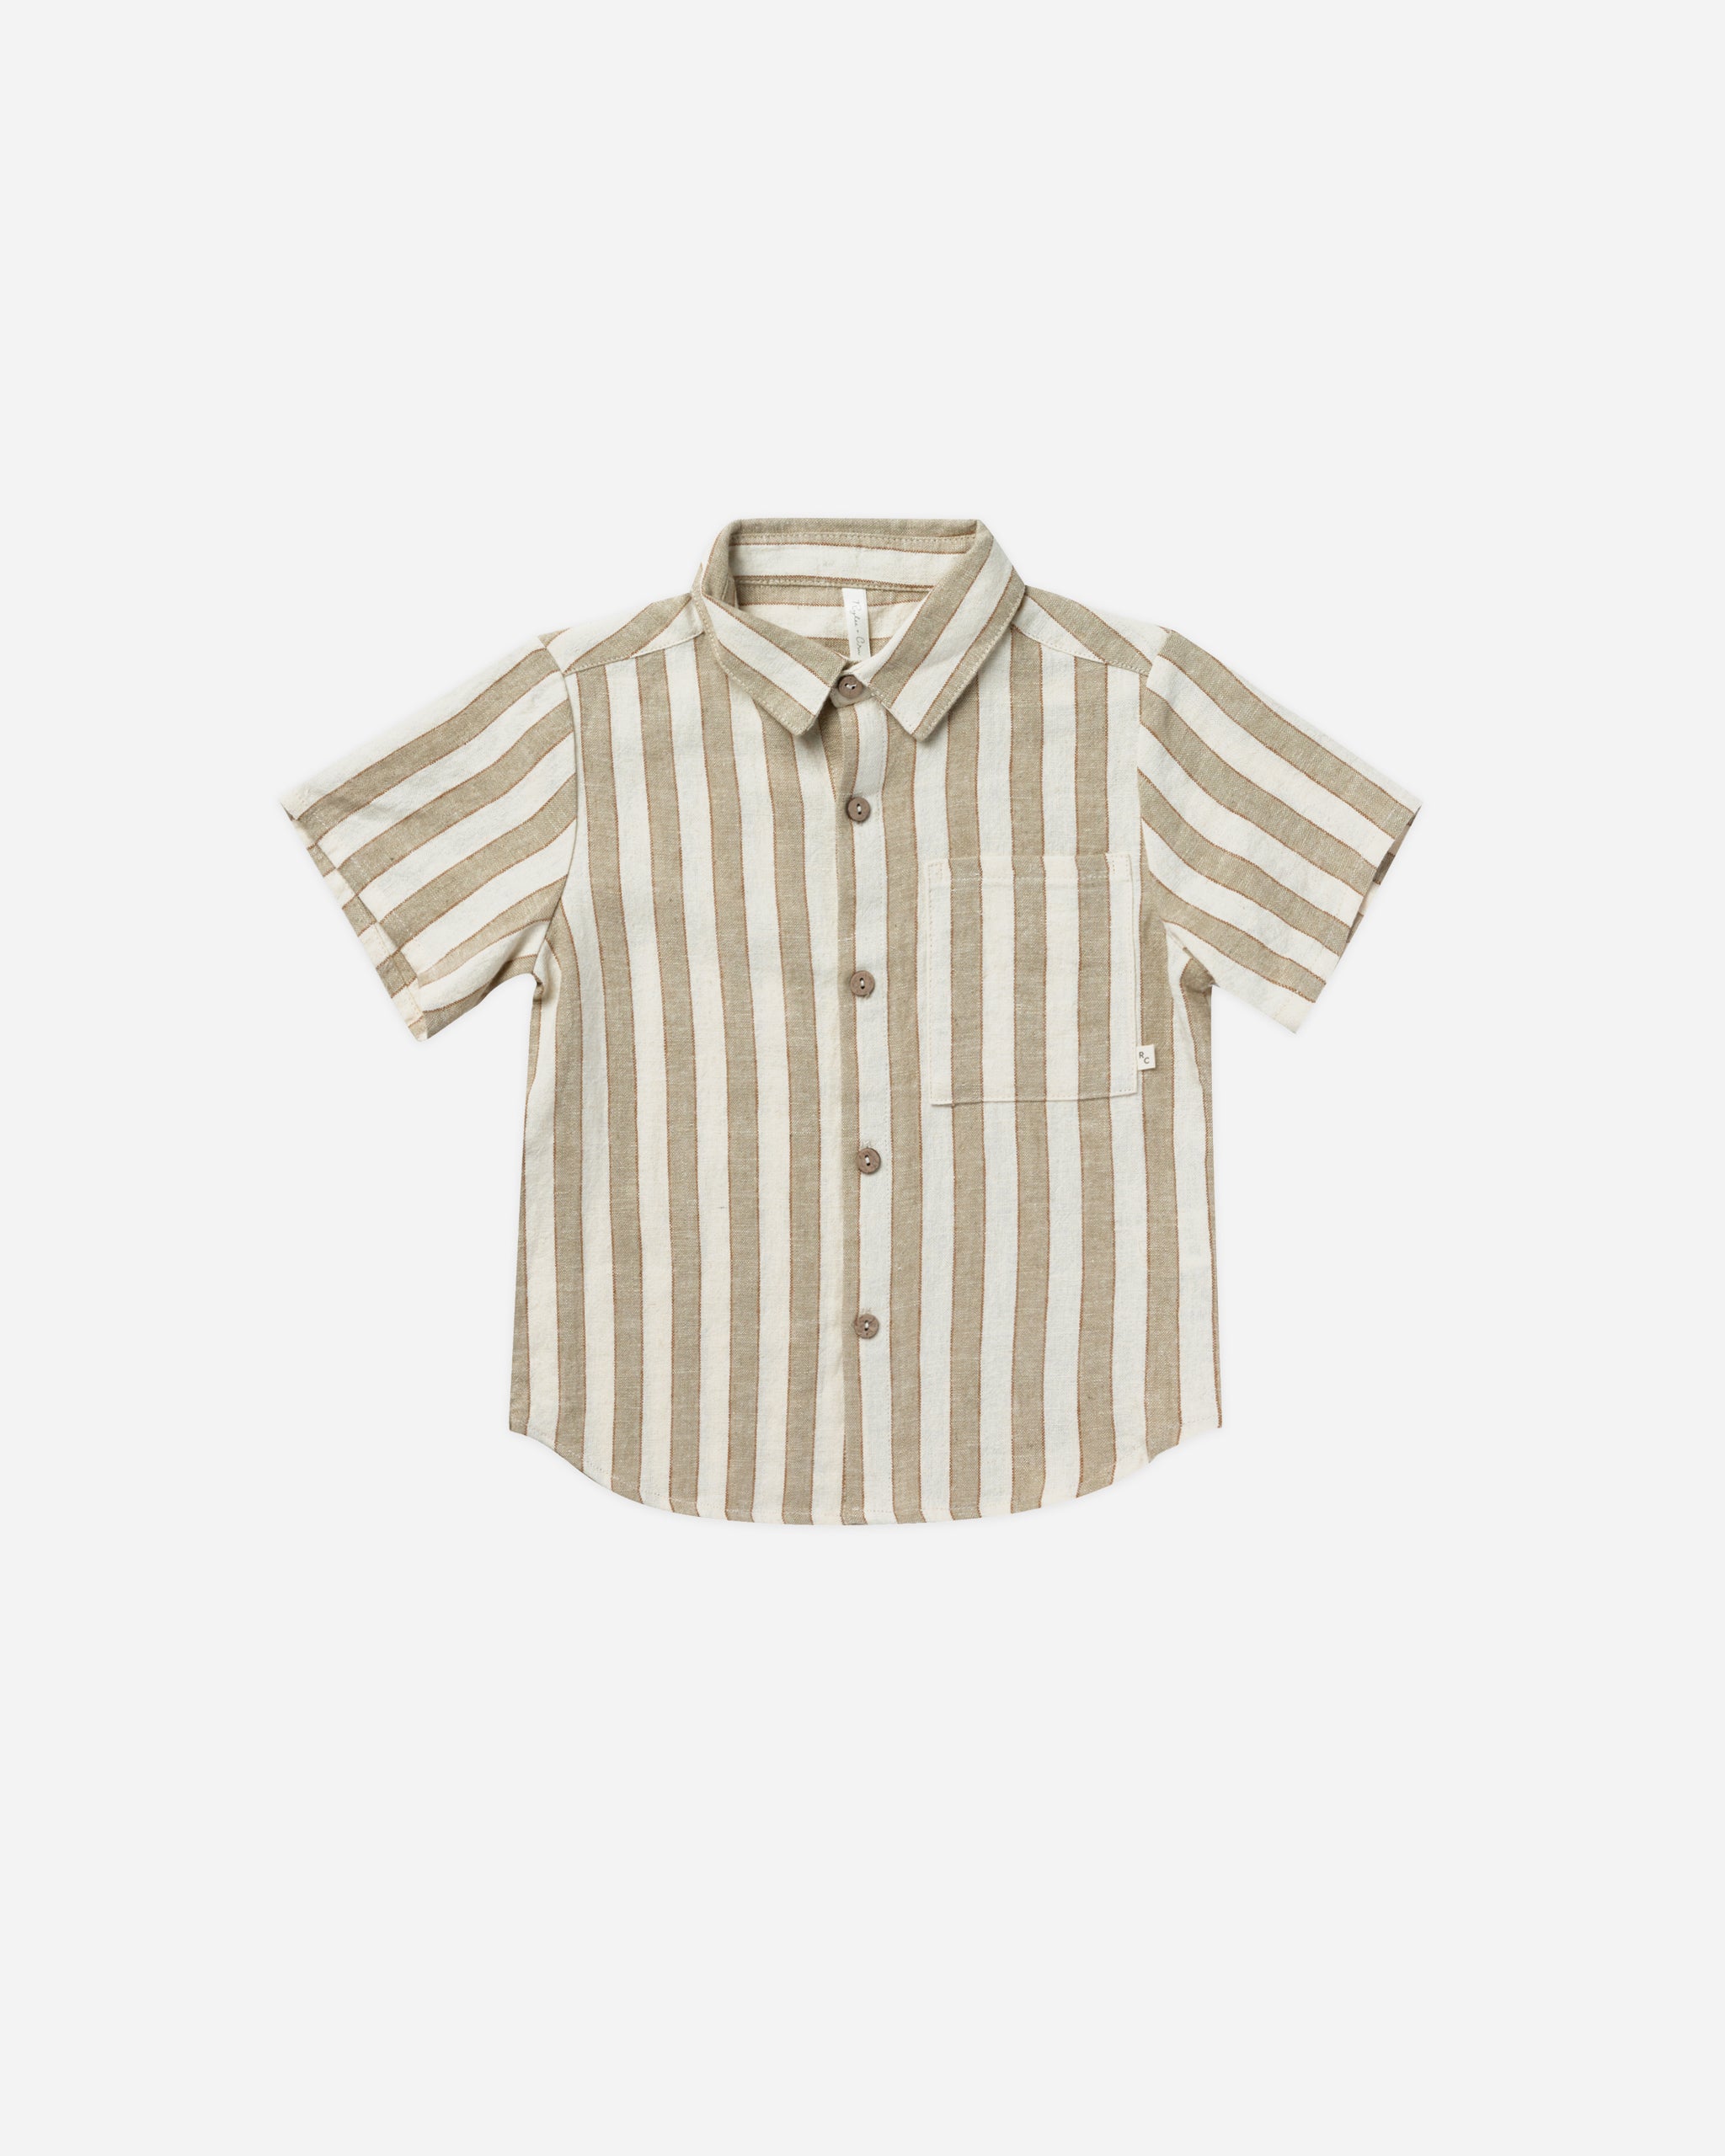 Collared Short Sleeve Shirt || Autumn Stripe - Rylee + Cru | Kids Clothes | Trendy Baby Clothes | Modern Infant Outfits |